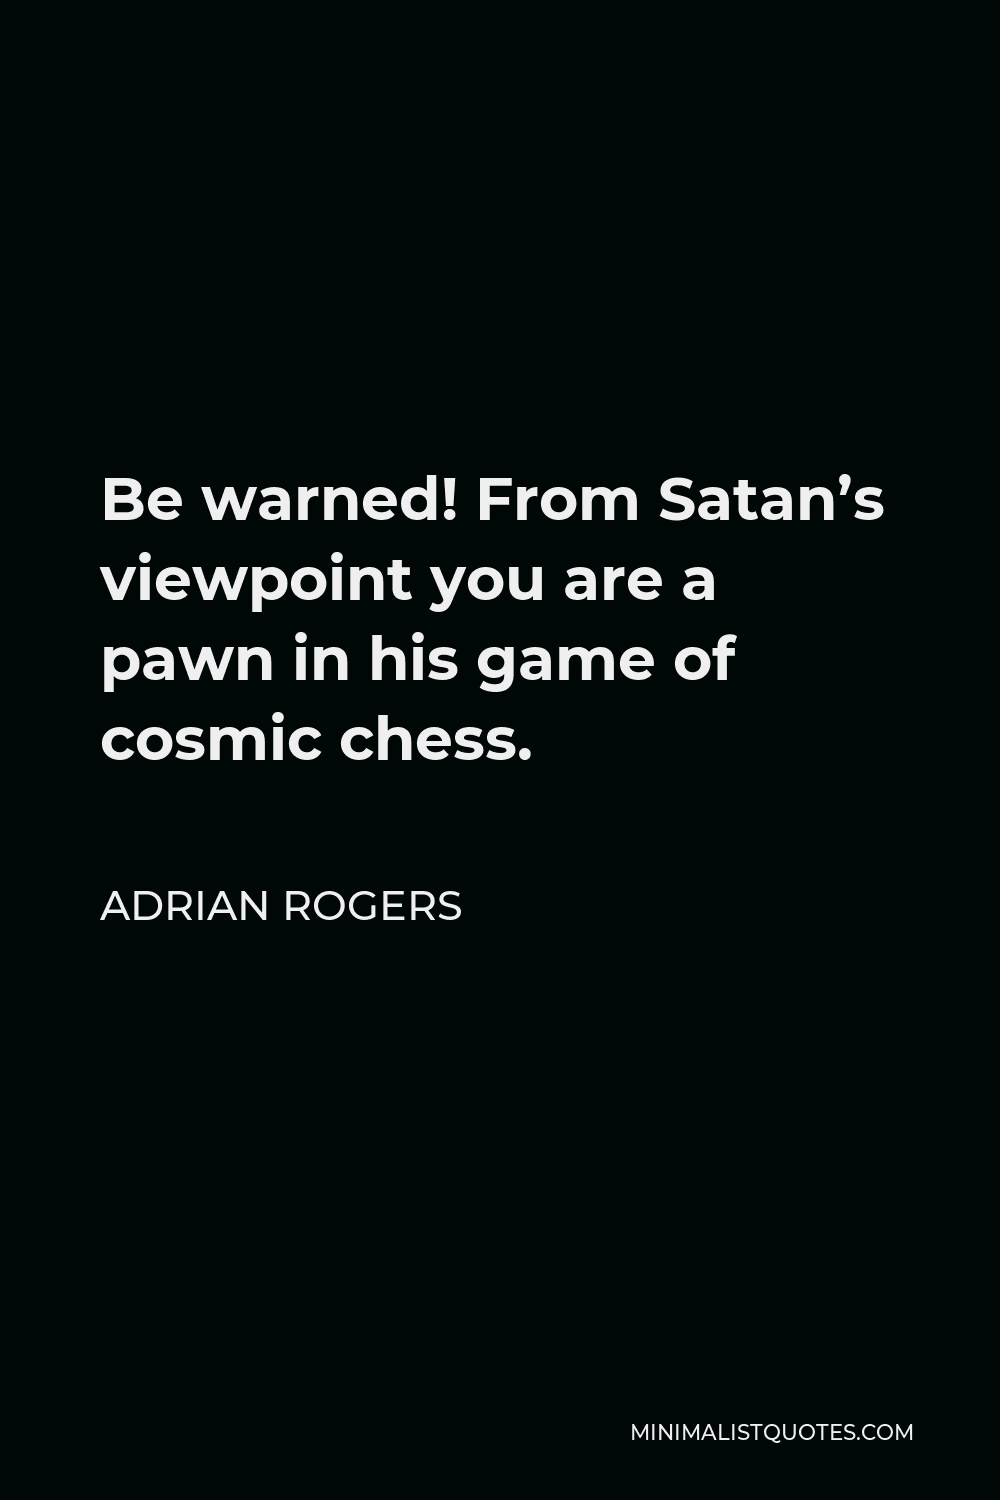 Adrian Rogers Quote - Be warned! From Satan’s viewpoint you are a pawn in his game of cosmic chess.